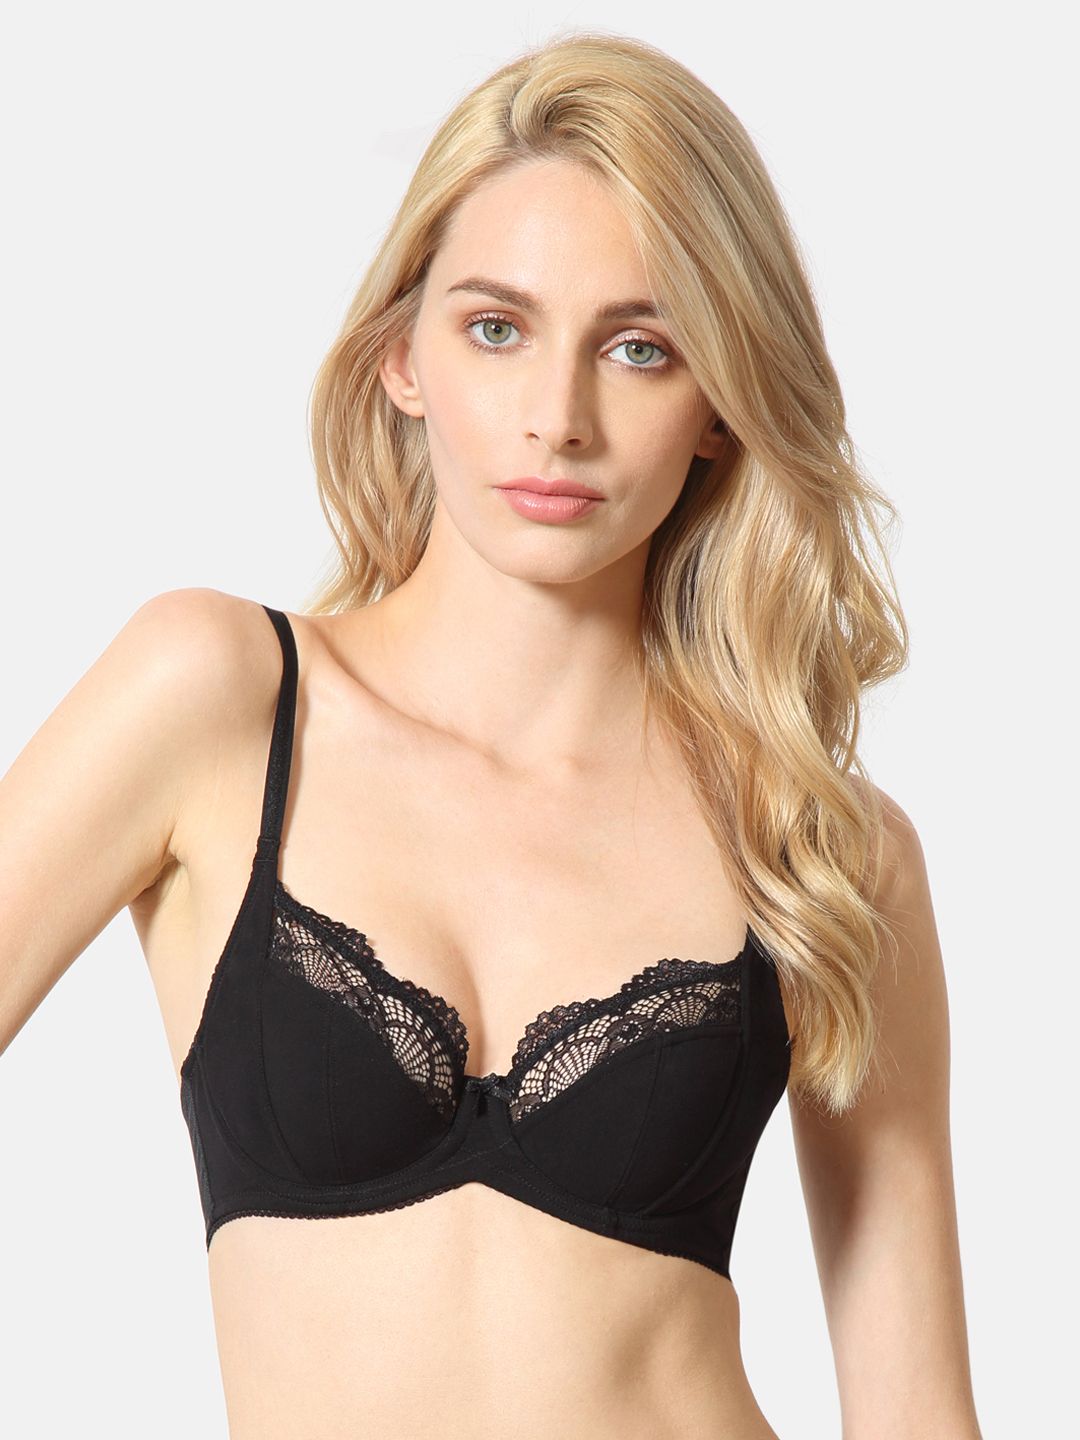 Van Heusen Black Solid Underwired Non Padded Wired Lace Tipped Balconette Bra ILIBR1ACSSXD11009 Price in India